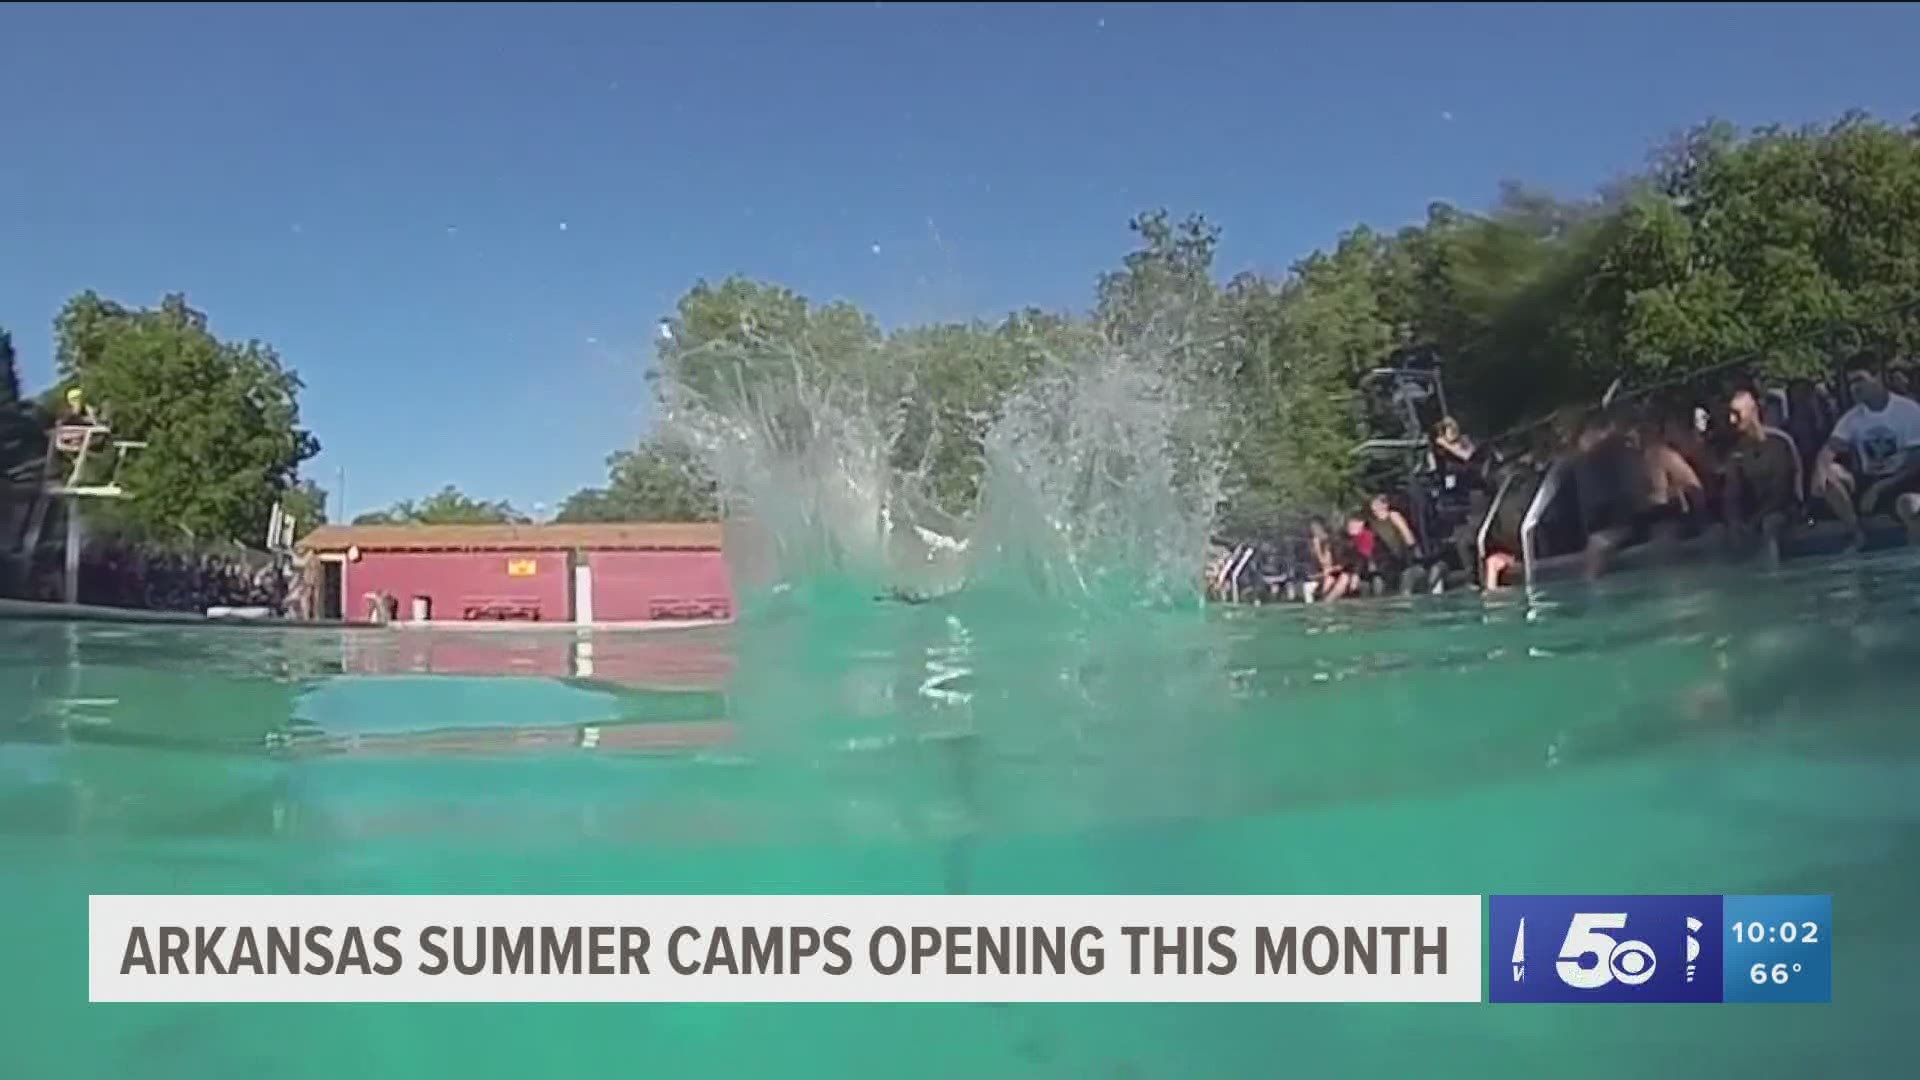 It was announced Wednesday that summer camps in Arkansas could reopen at the end of the month.